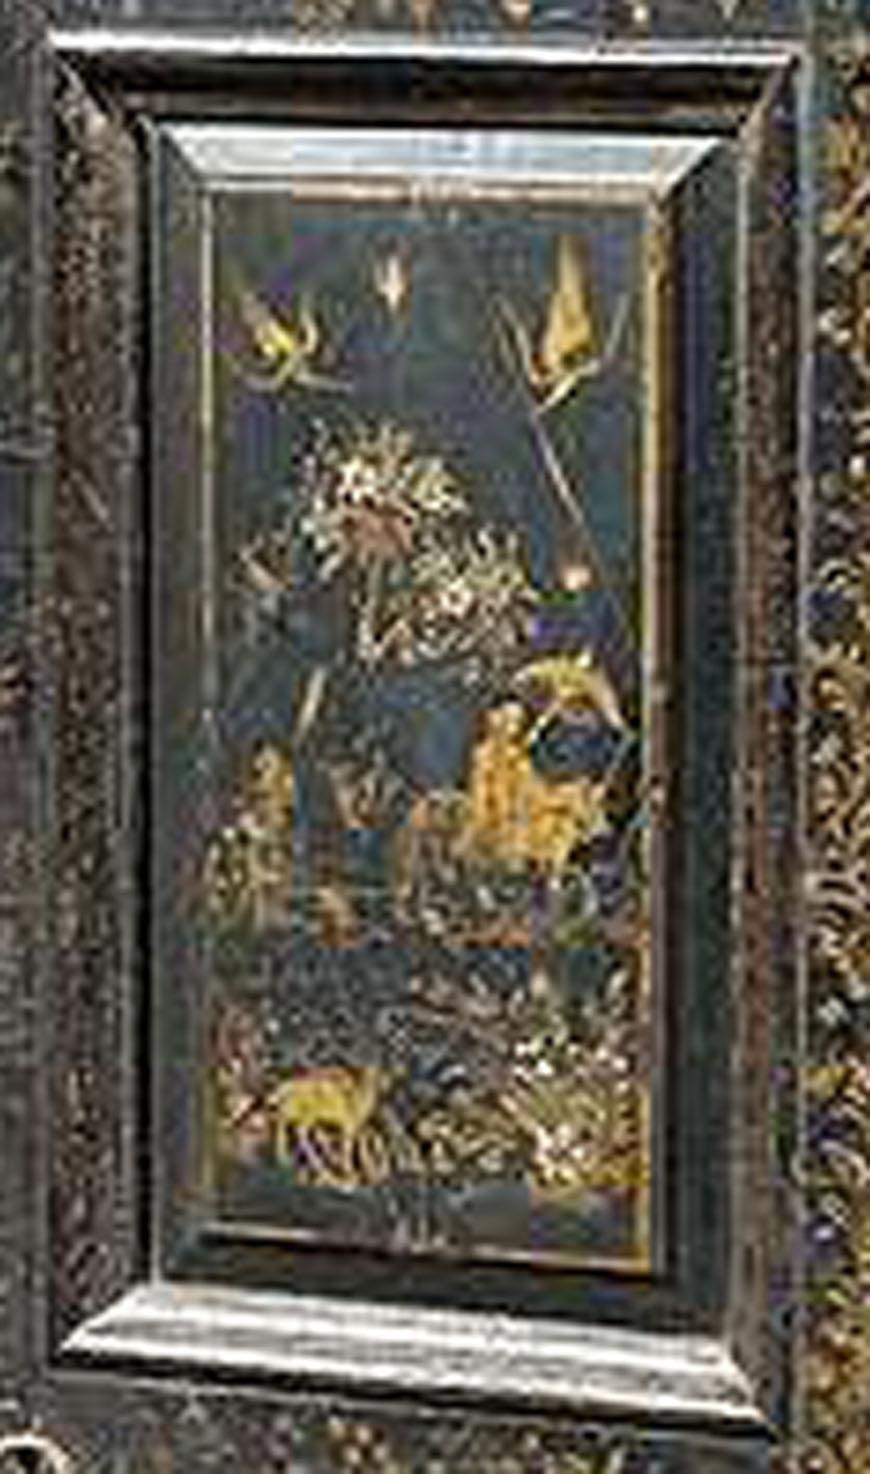 Chinese-style lacquer cupboard with rich painting decoration. The four fillings of the two-doors-cupboard are painted with decorative Chinese sceneries, flowers, landscape, animals and buildings. The ground color is black, the Chinese-style lacquer